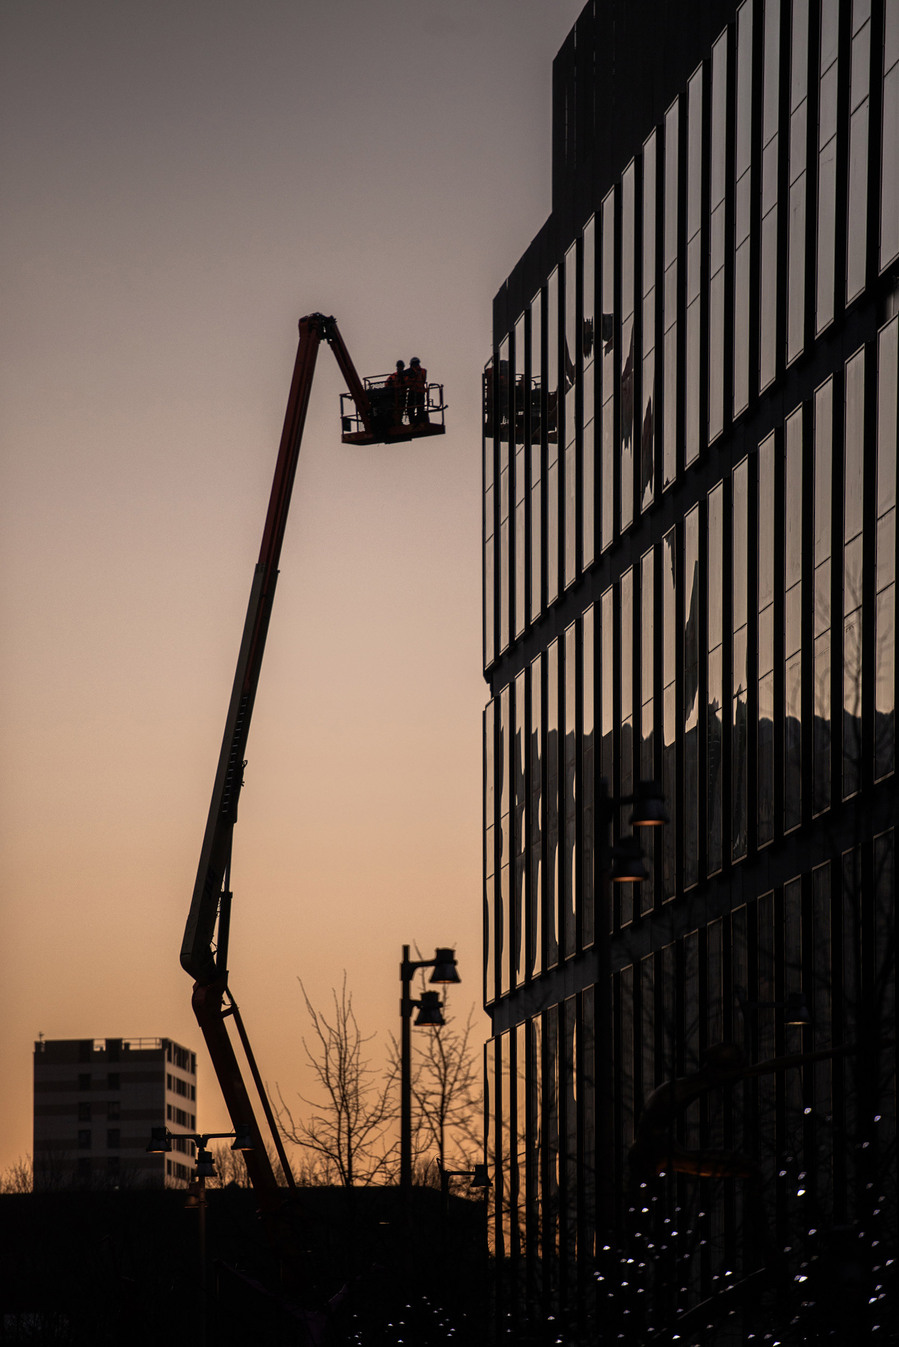 cropped image of modern city buildings against evening sky with cherrypicker and workers